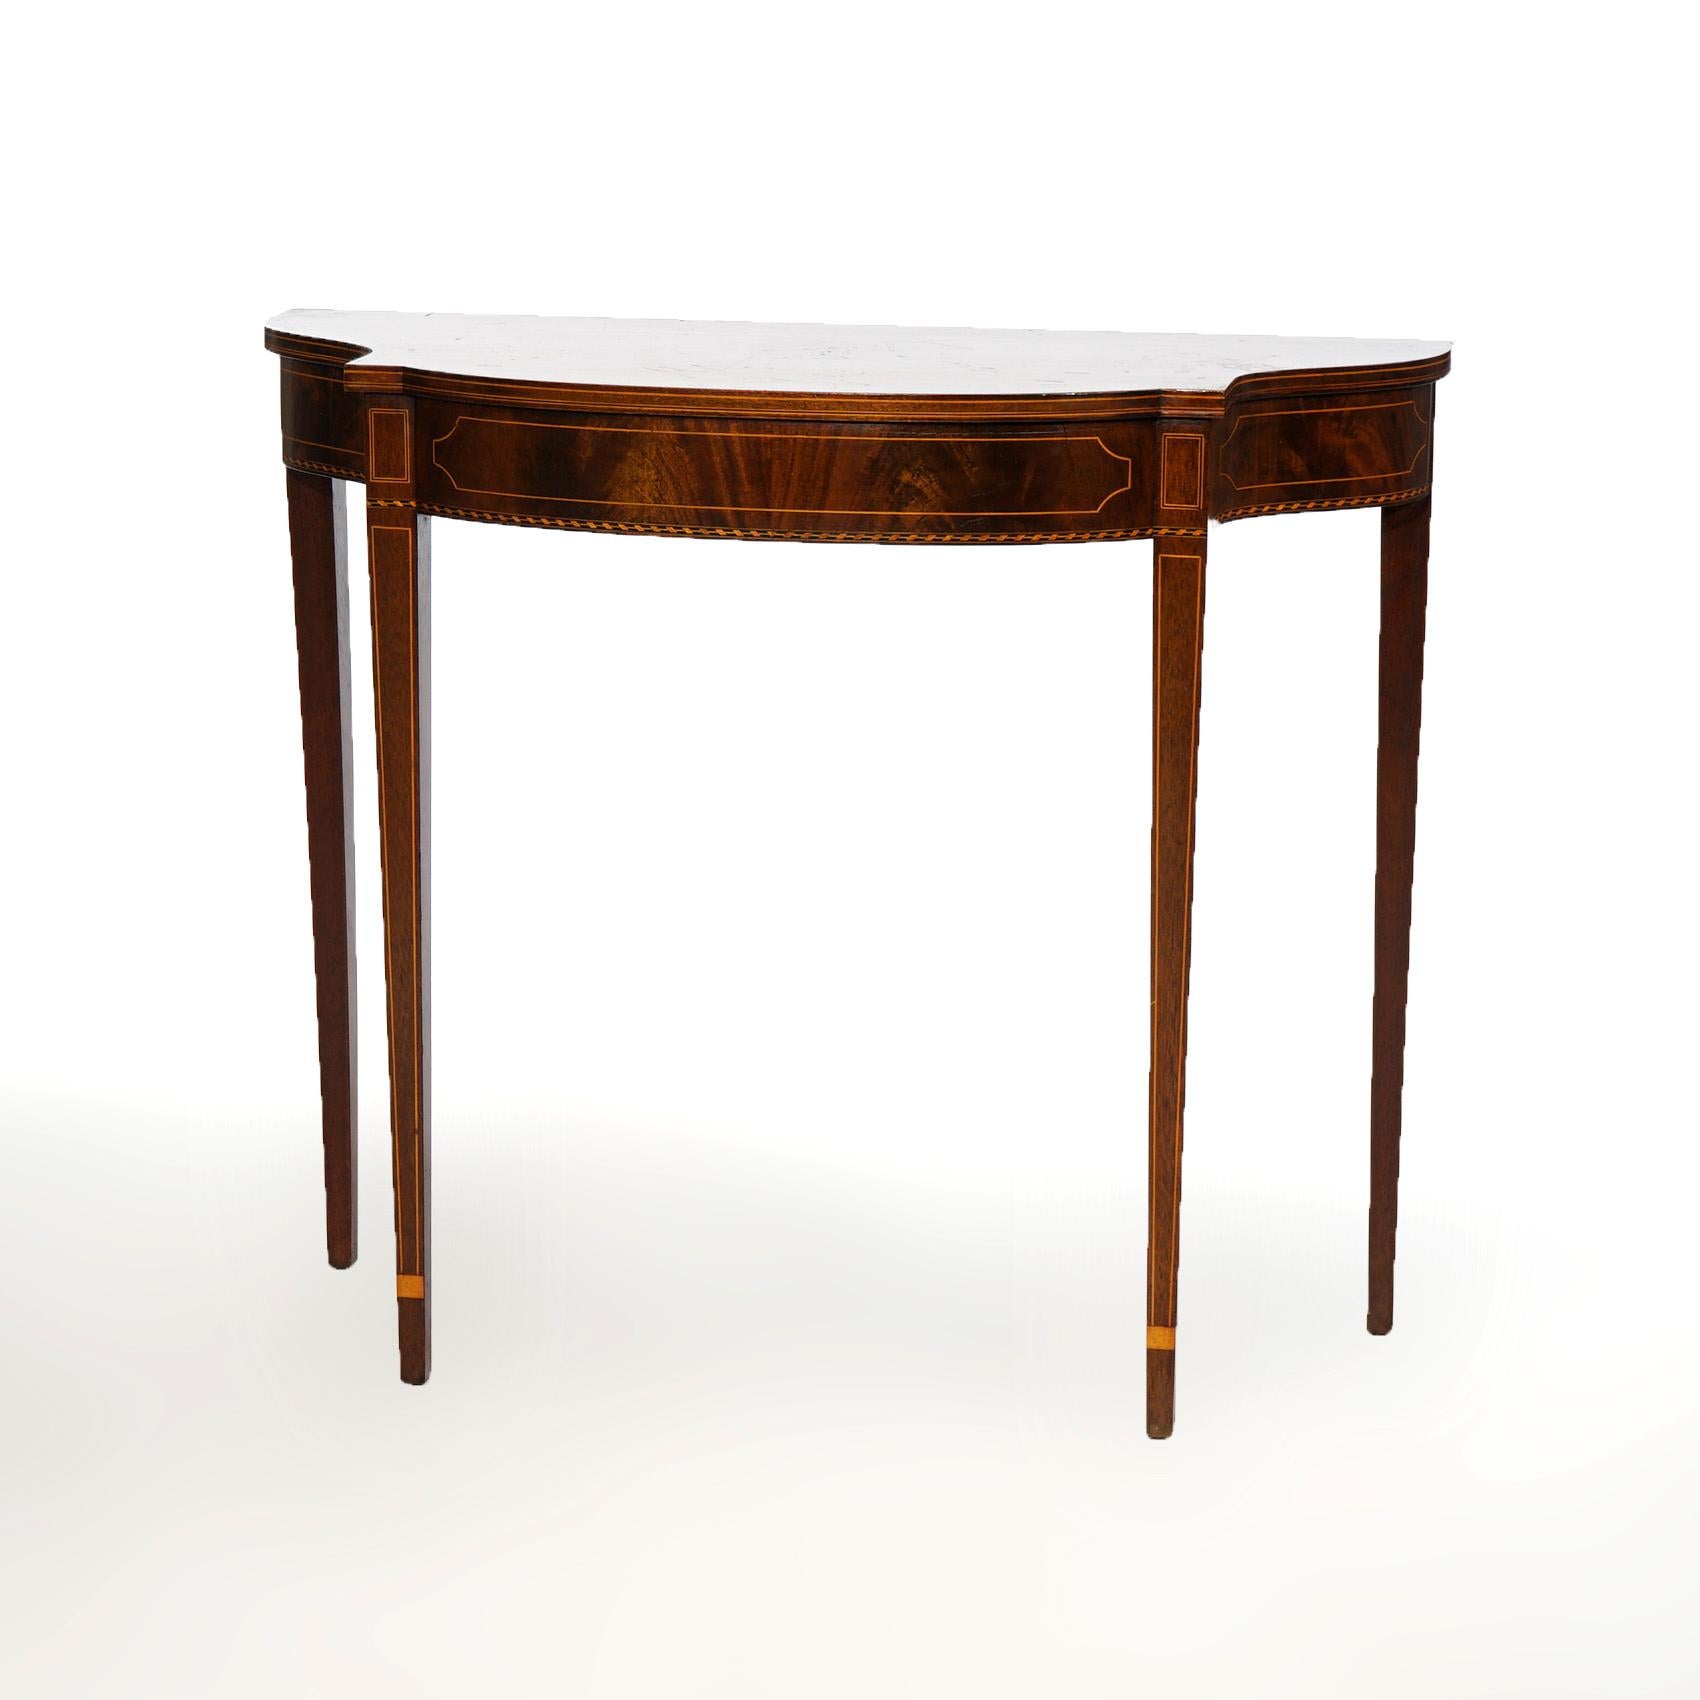 An antique side table by Potthast Brothers, Baltimore, Maryland offers flame mahogany construction in demi-lune form with satinwood inlay and banding throughout, raised on straight and tapered legs, maker label as  photographed, c1920

Measures-